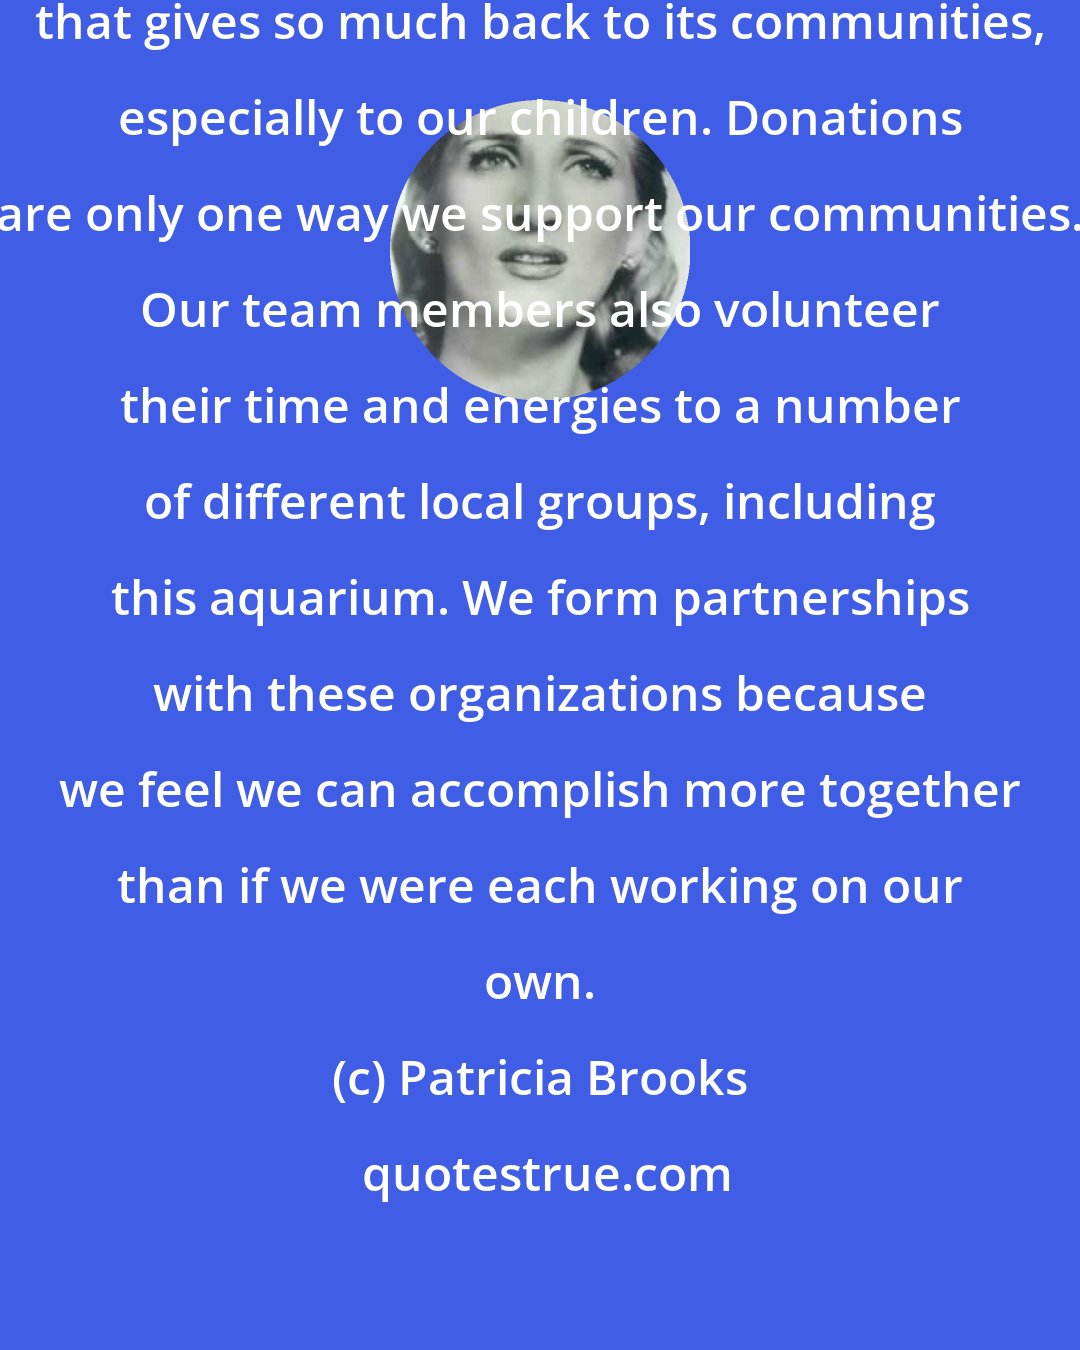 Patricia Brooks: It's wonderful to work for a company that gives so much back to its communities, especially to our children. Donations are only one way we support our communities. Our team members also volunteer their time and energies to a number of different local groups, including this aquarium. We form partnerships with these organizations because we feel we can accomplish more together than if we were each working on our own.